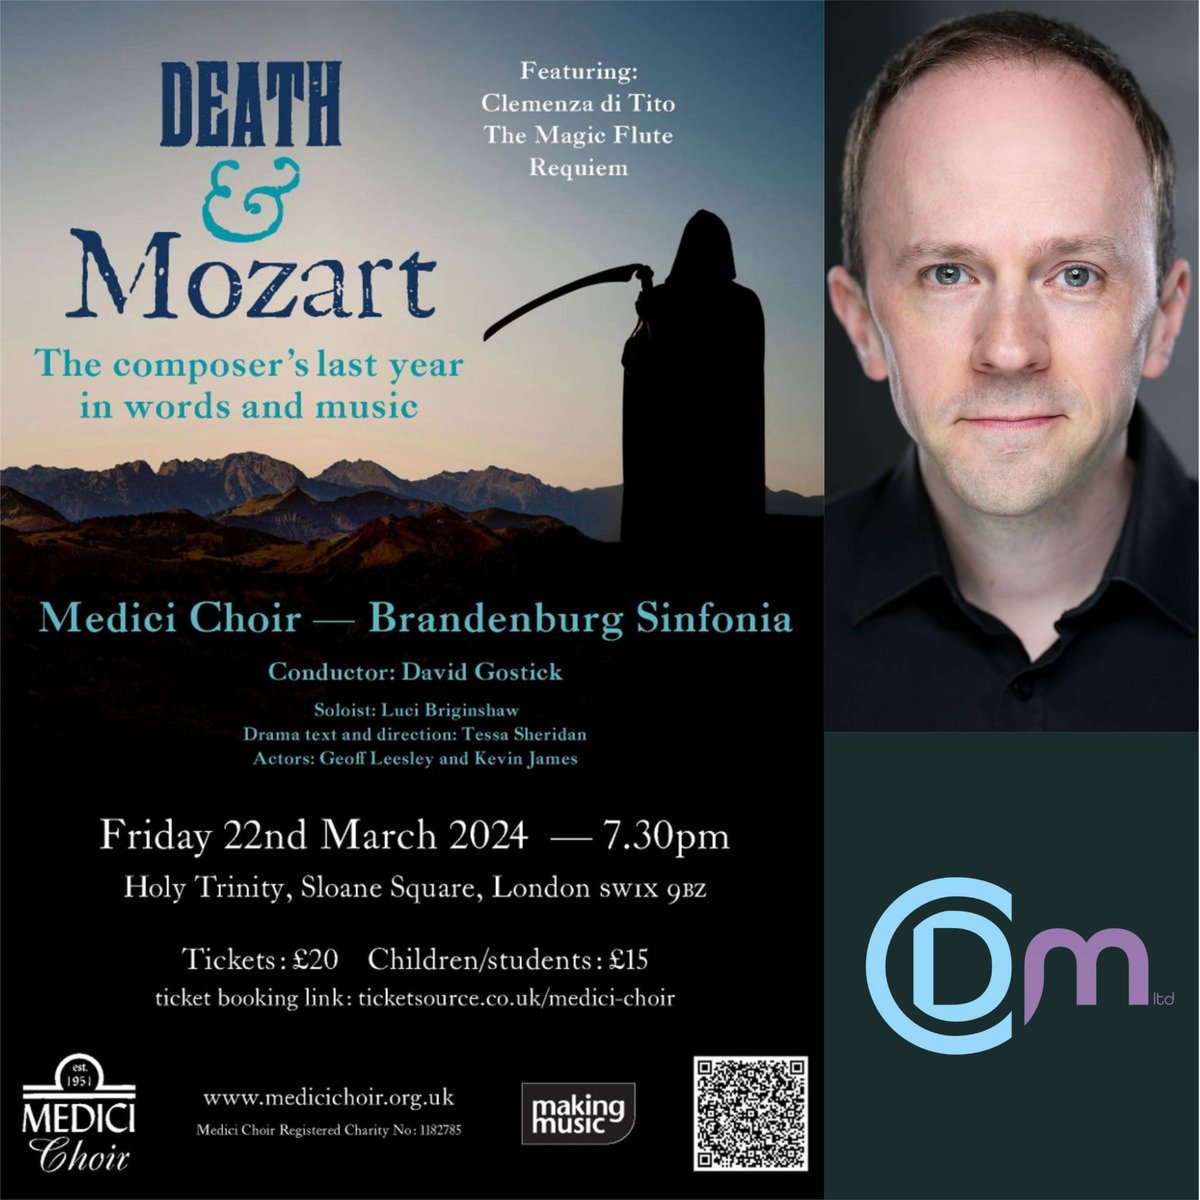 Break a leg to client KEVIN JAMES (@itsKevinJames) who plays Mozart in Medici Choir's Spring concert, Death And Mozart, the composer's last year in words and music. The concert takes place tonight at the Holy Trinity Church in Sloane Square, London.